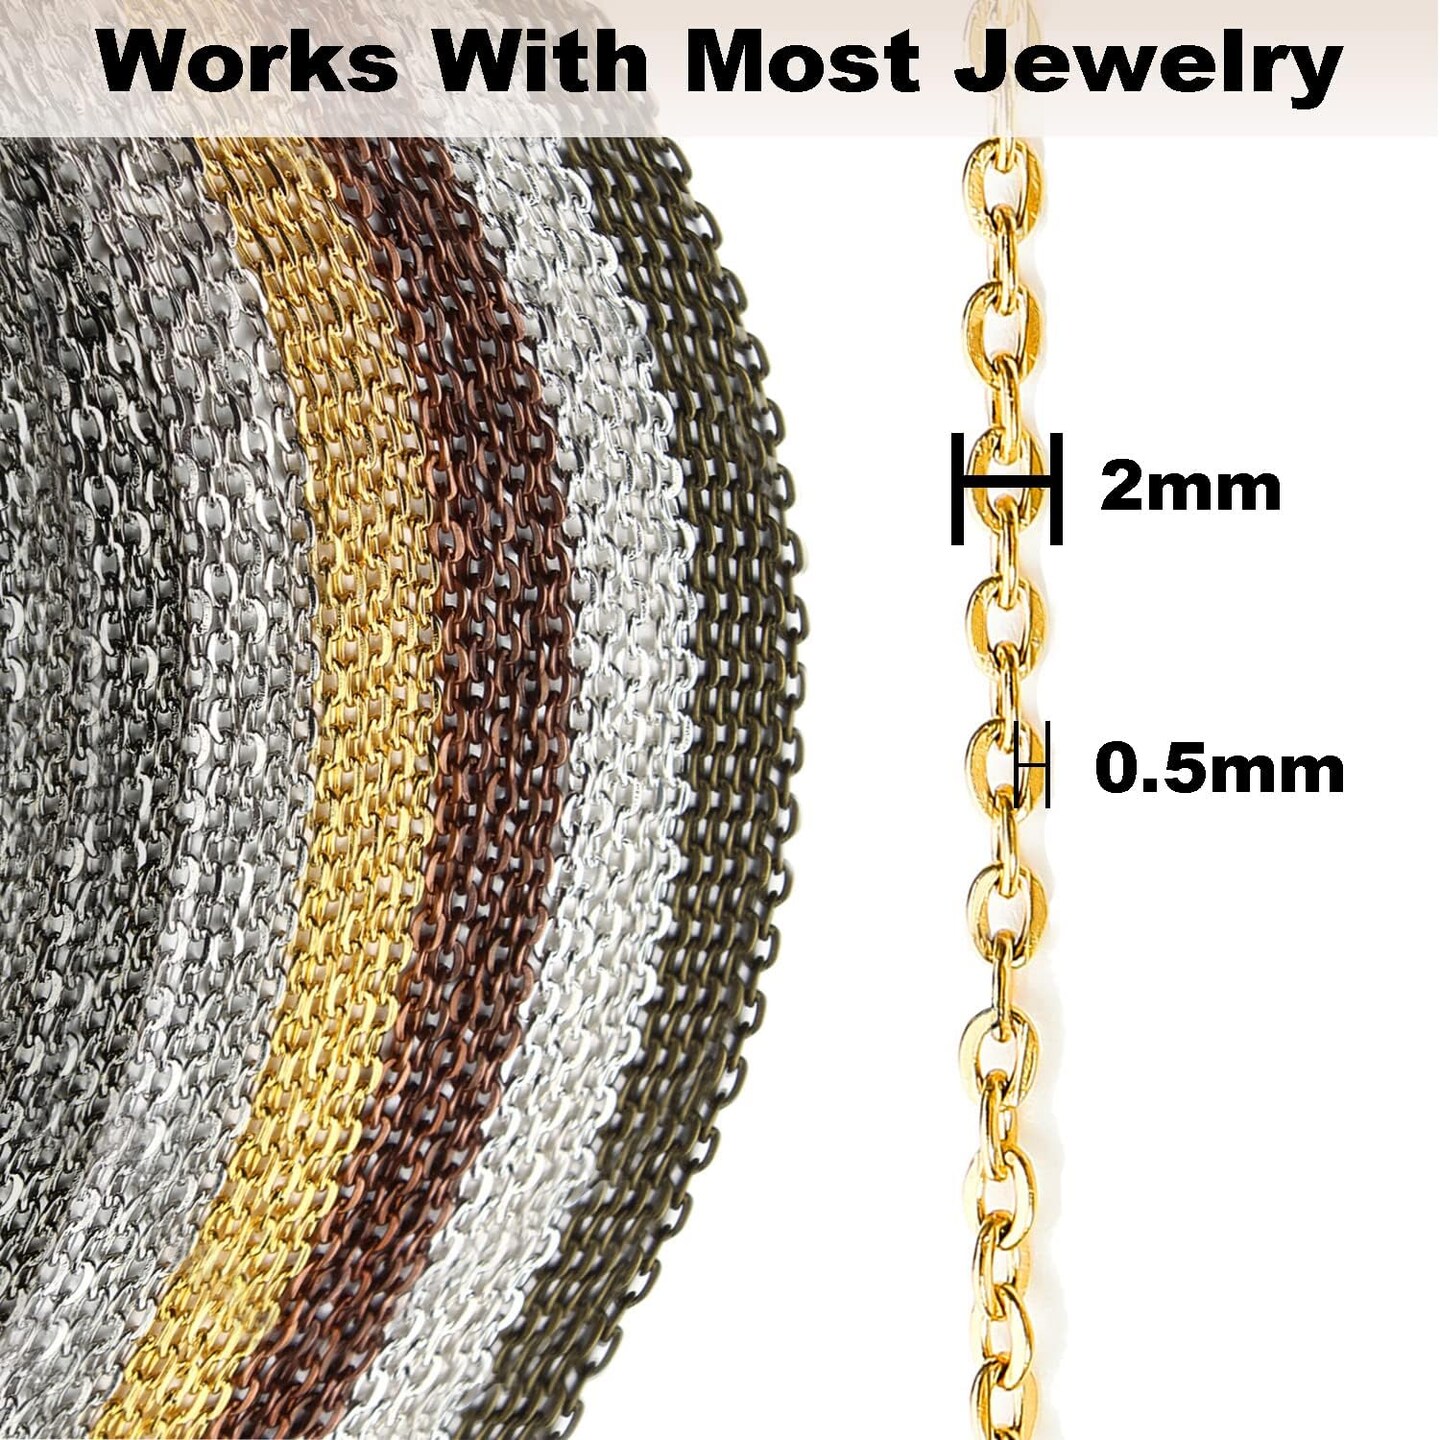 Chains Jewelry Making Supplies, 60ft Cable Link Chains for Making Jewelry Necklace Earring Bracelet Findings DIY Craft Kit for Adults, 6-Color 2mm Gold Silver Copper Plated Metal Link Rolls Bulk